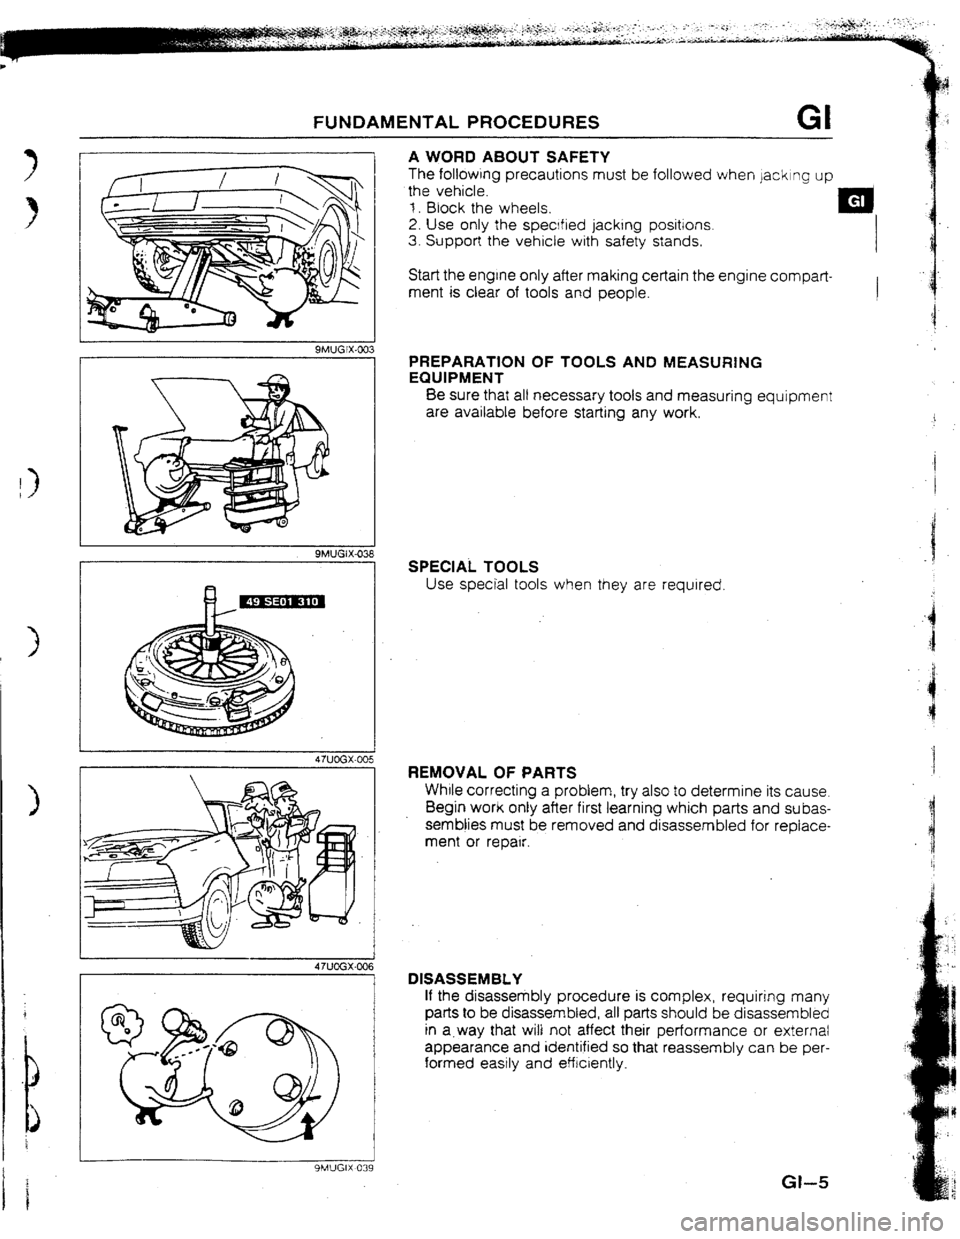 MAZDA 323 1992  Workshop Manual Suplement FUNDAMENTAL PROCEDURES GI 
A WORD ABOUT SAFETY 
The following precautions must be followed when jacking up 
the vehicle. 
t . Block the wheels. 
2. Use only the specfred jacking positions. 
3. Support